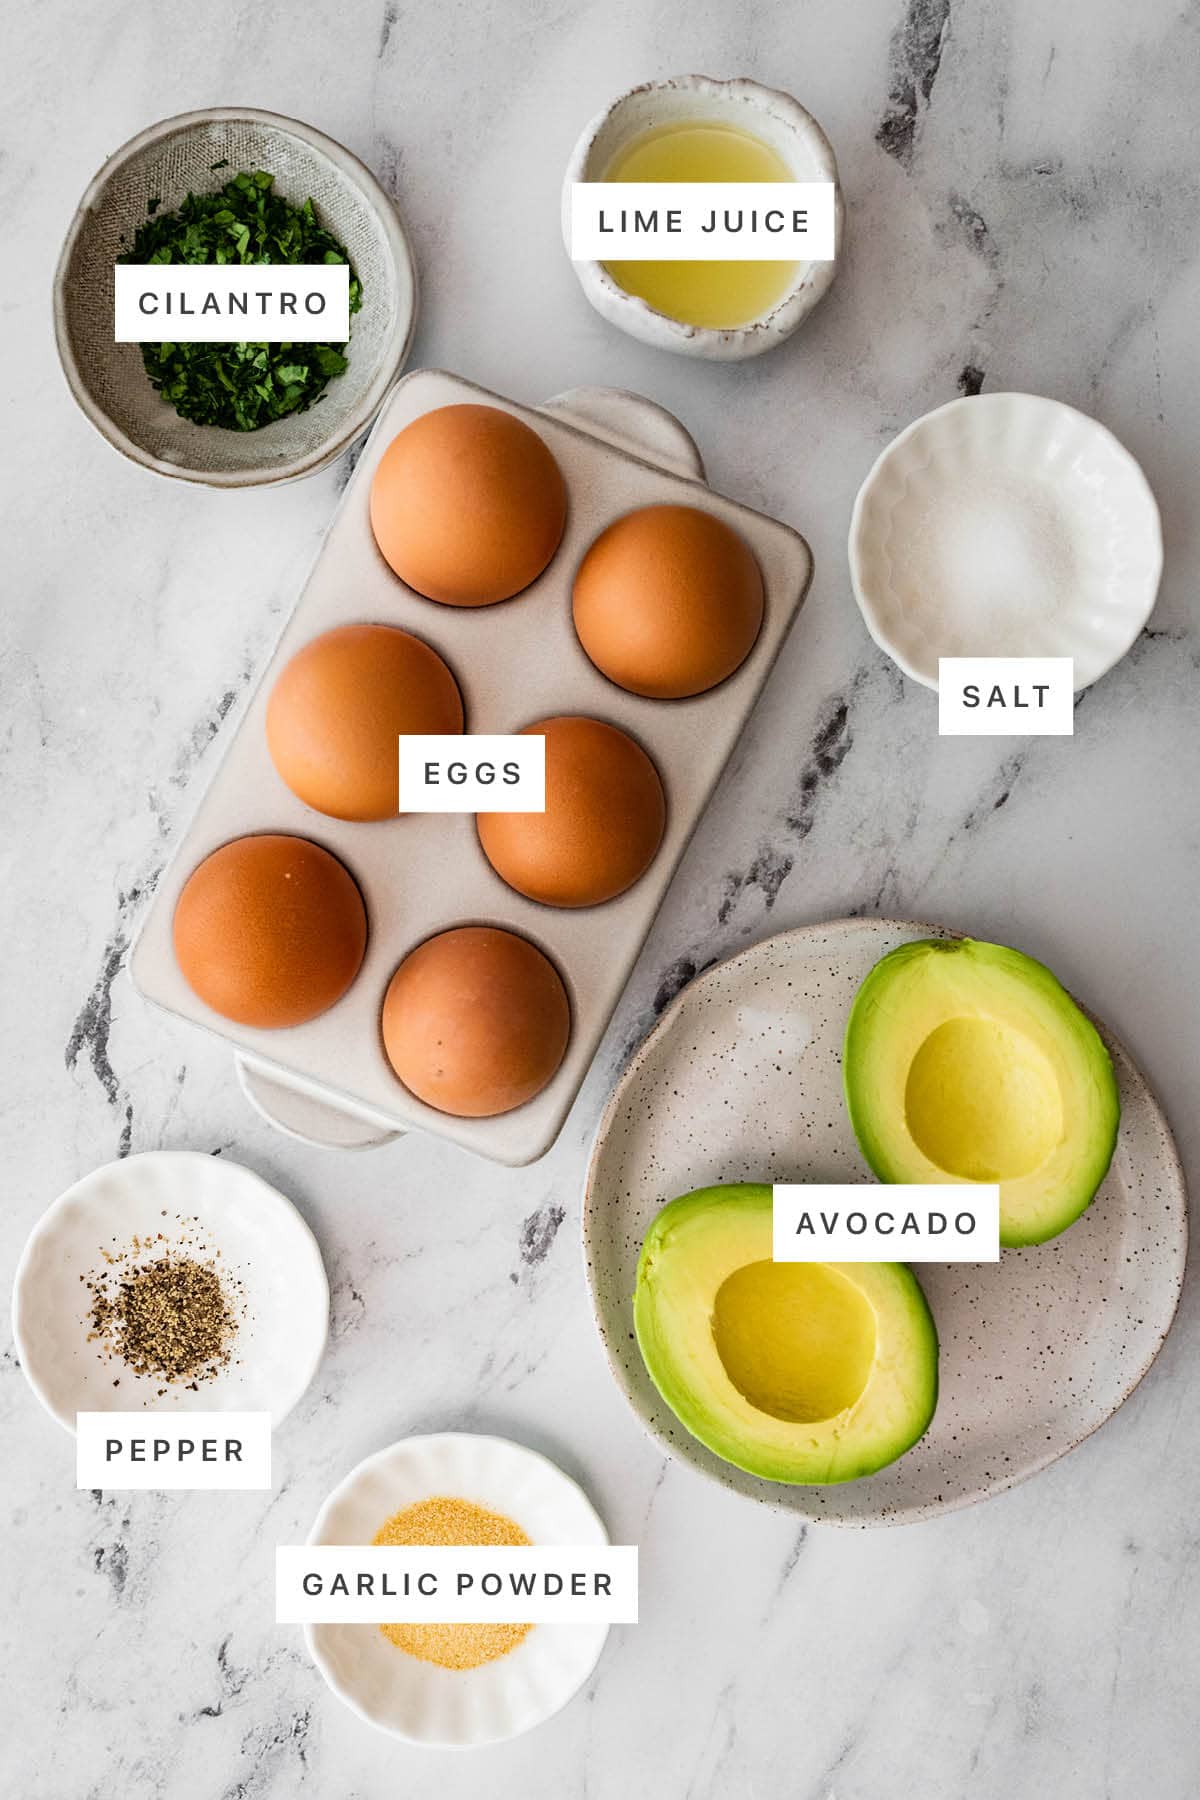 Ingredients measured out to make Avocado Deviled Eggs: cilantro, lime juice, salt, eggs, pepper, garlic powder and avocado.